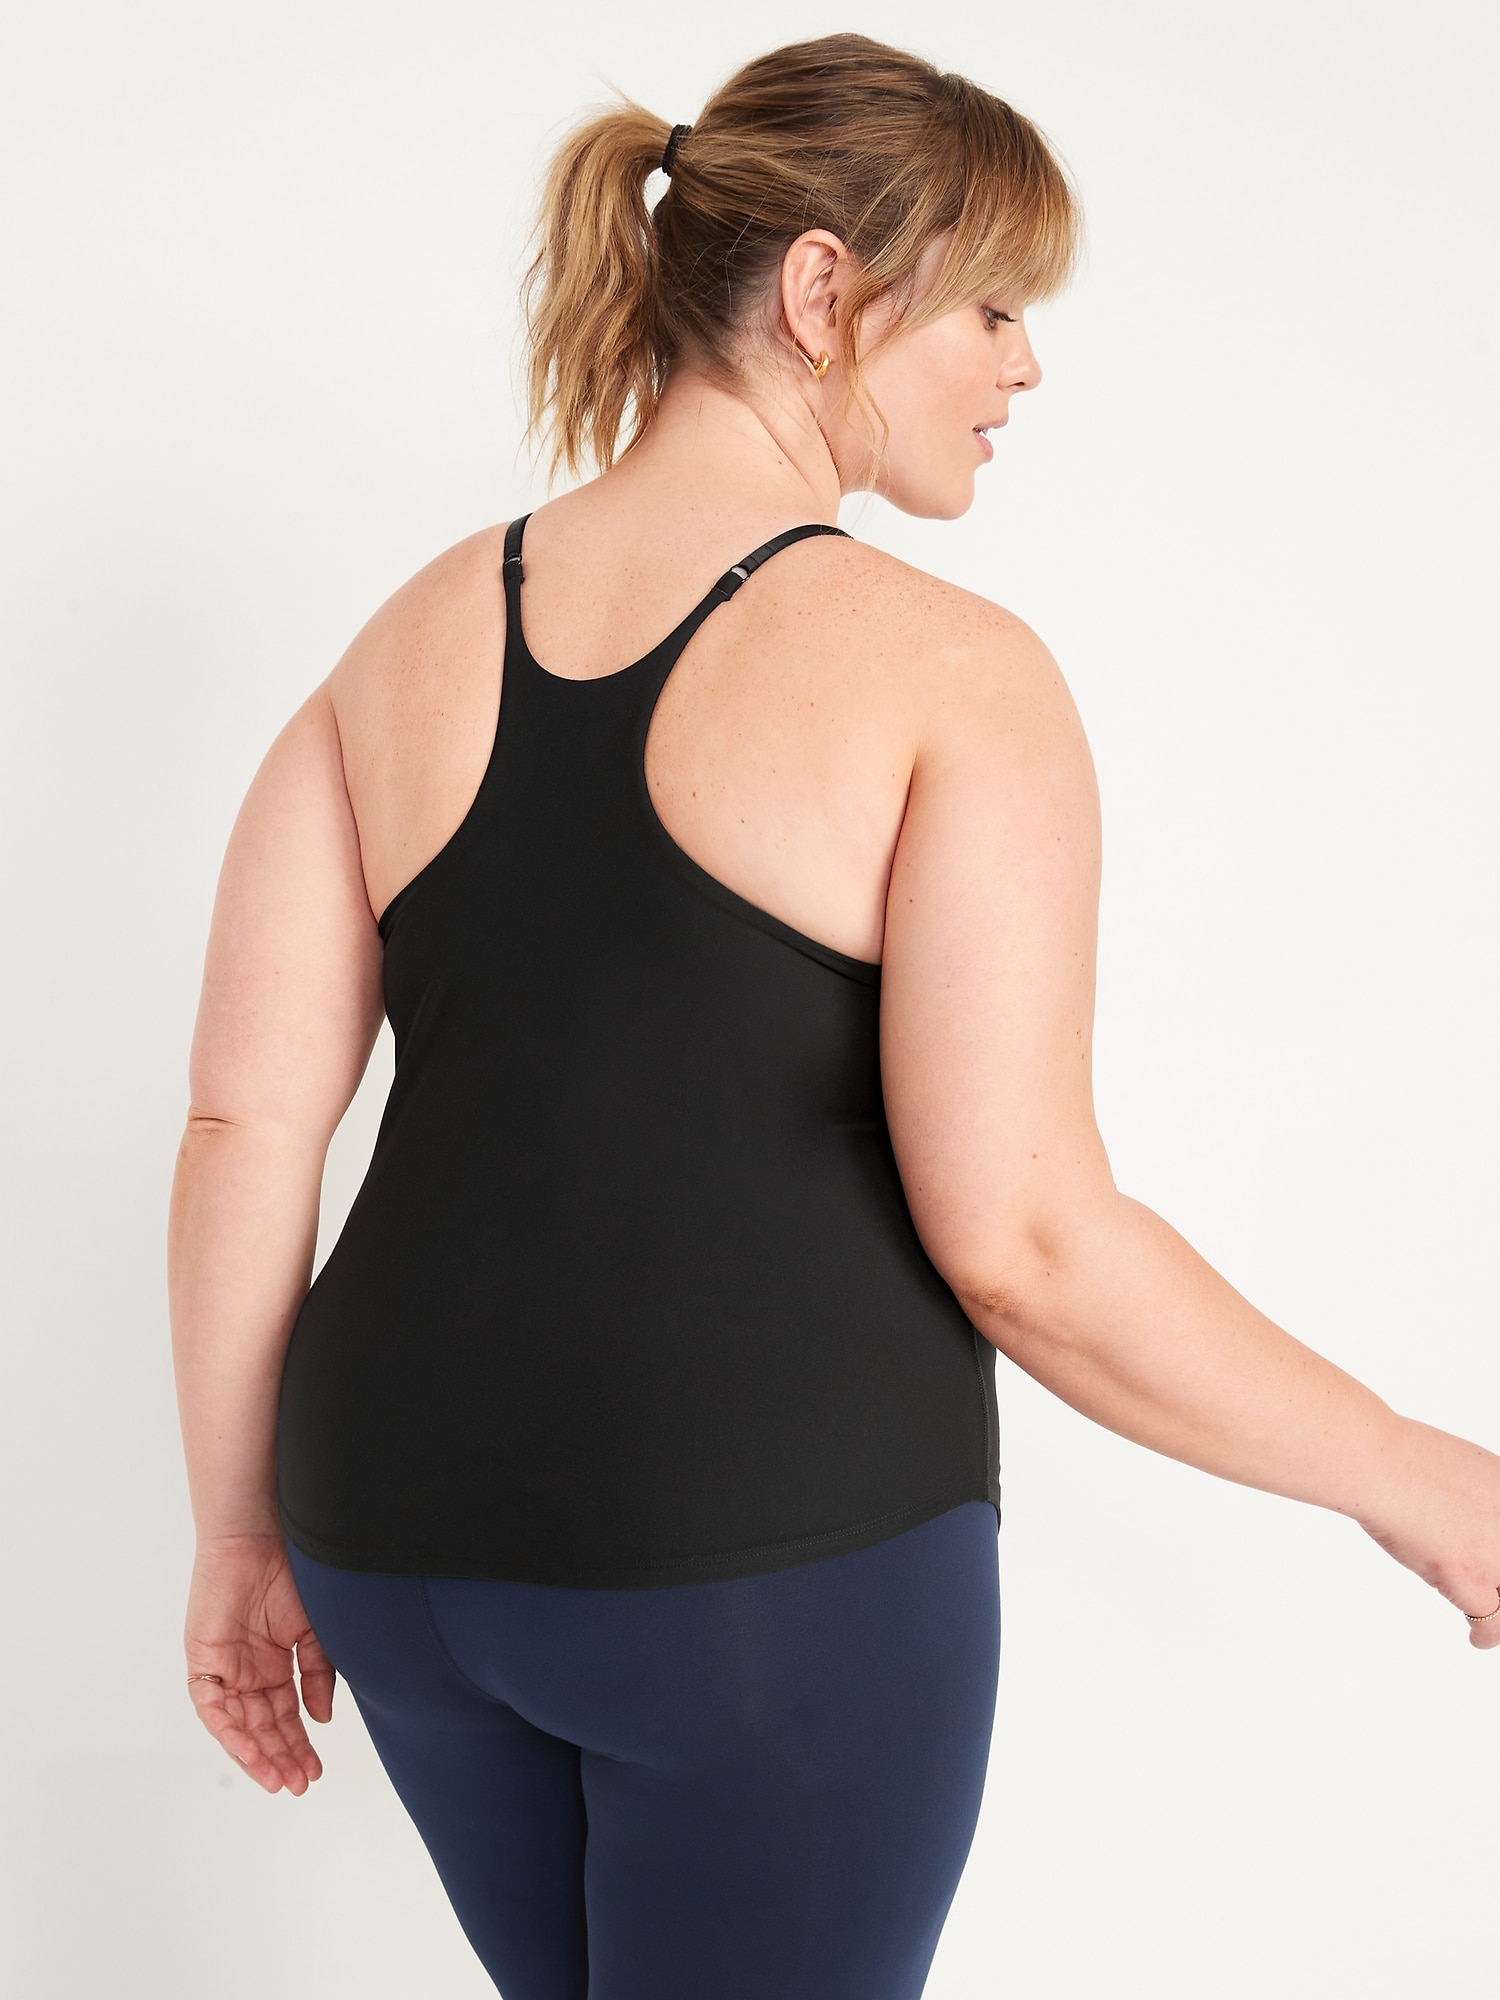 Old Navy NWT Blue PowerLite LYCRA ADAPTIV Racerback Shelf-Bra Active Tank  Top Size L - $35 (12% Off Retail) New With Tags - From Lindsay